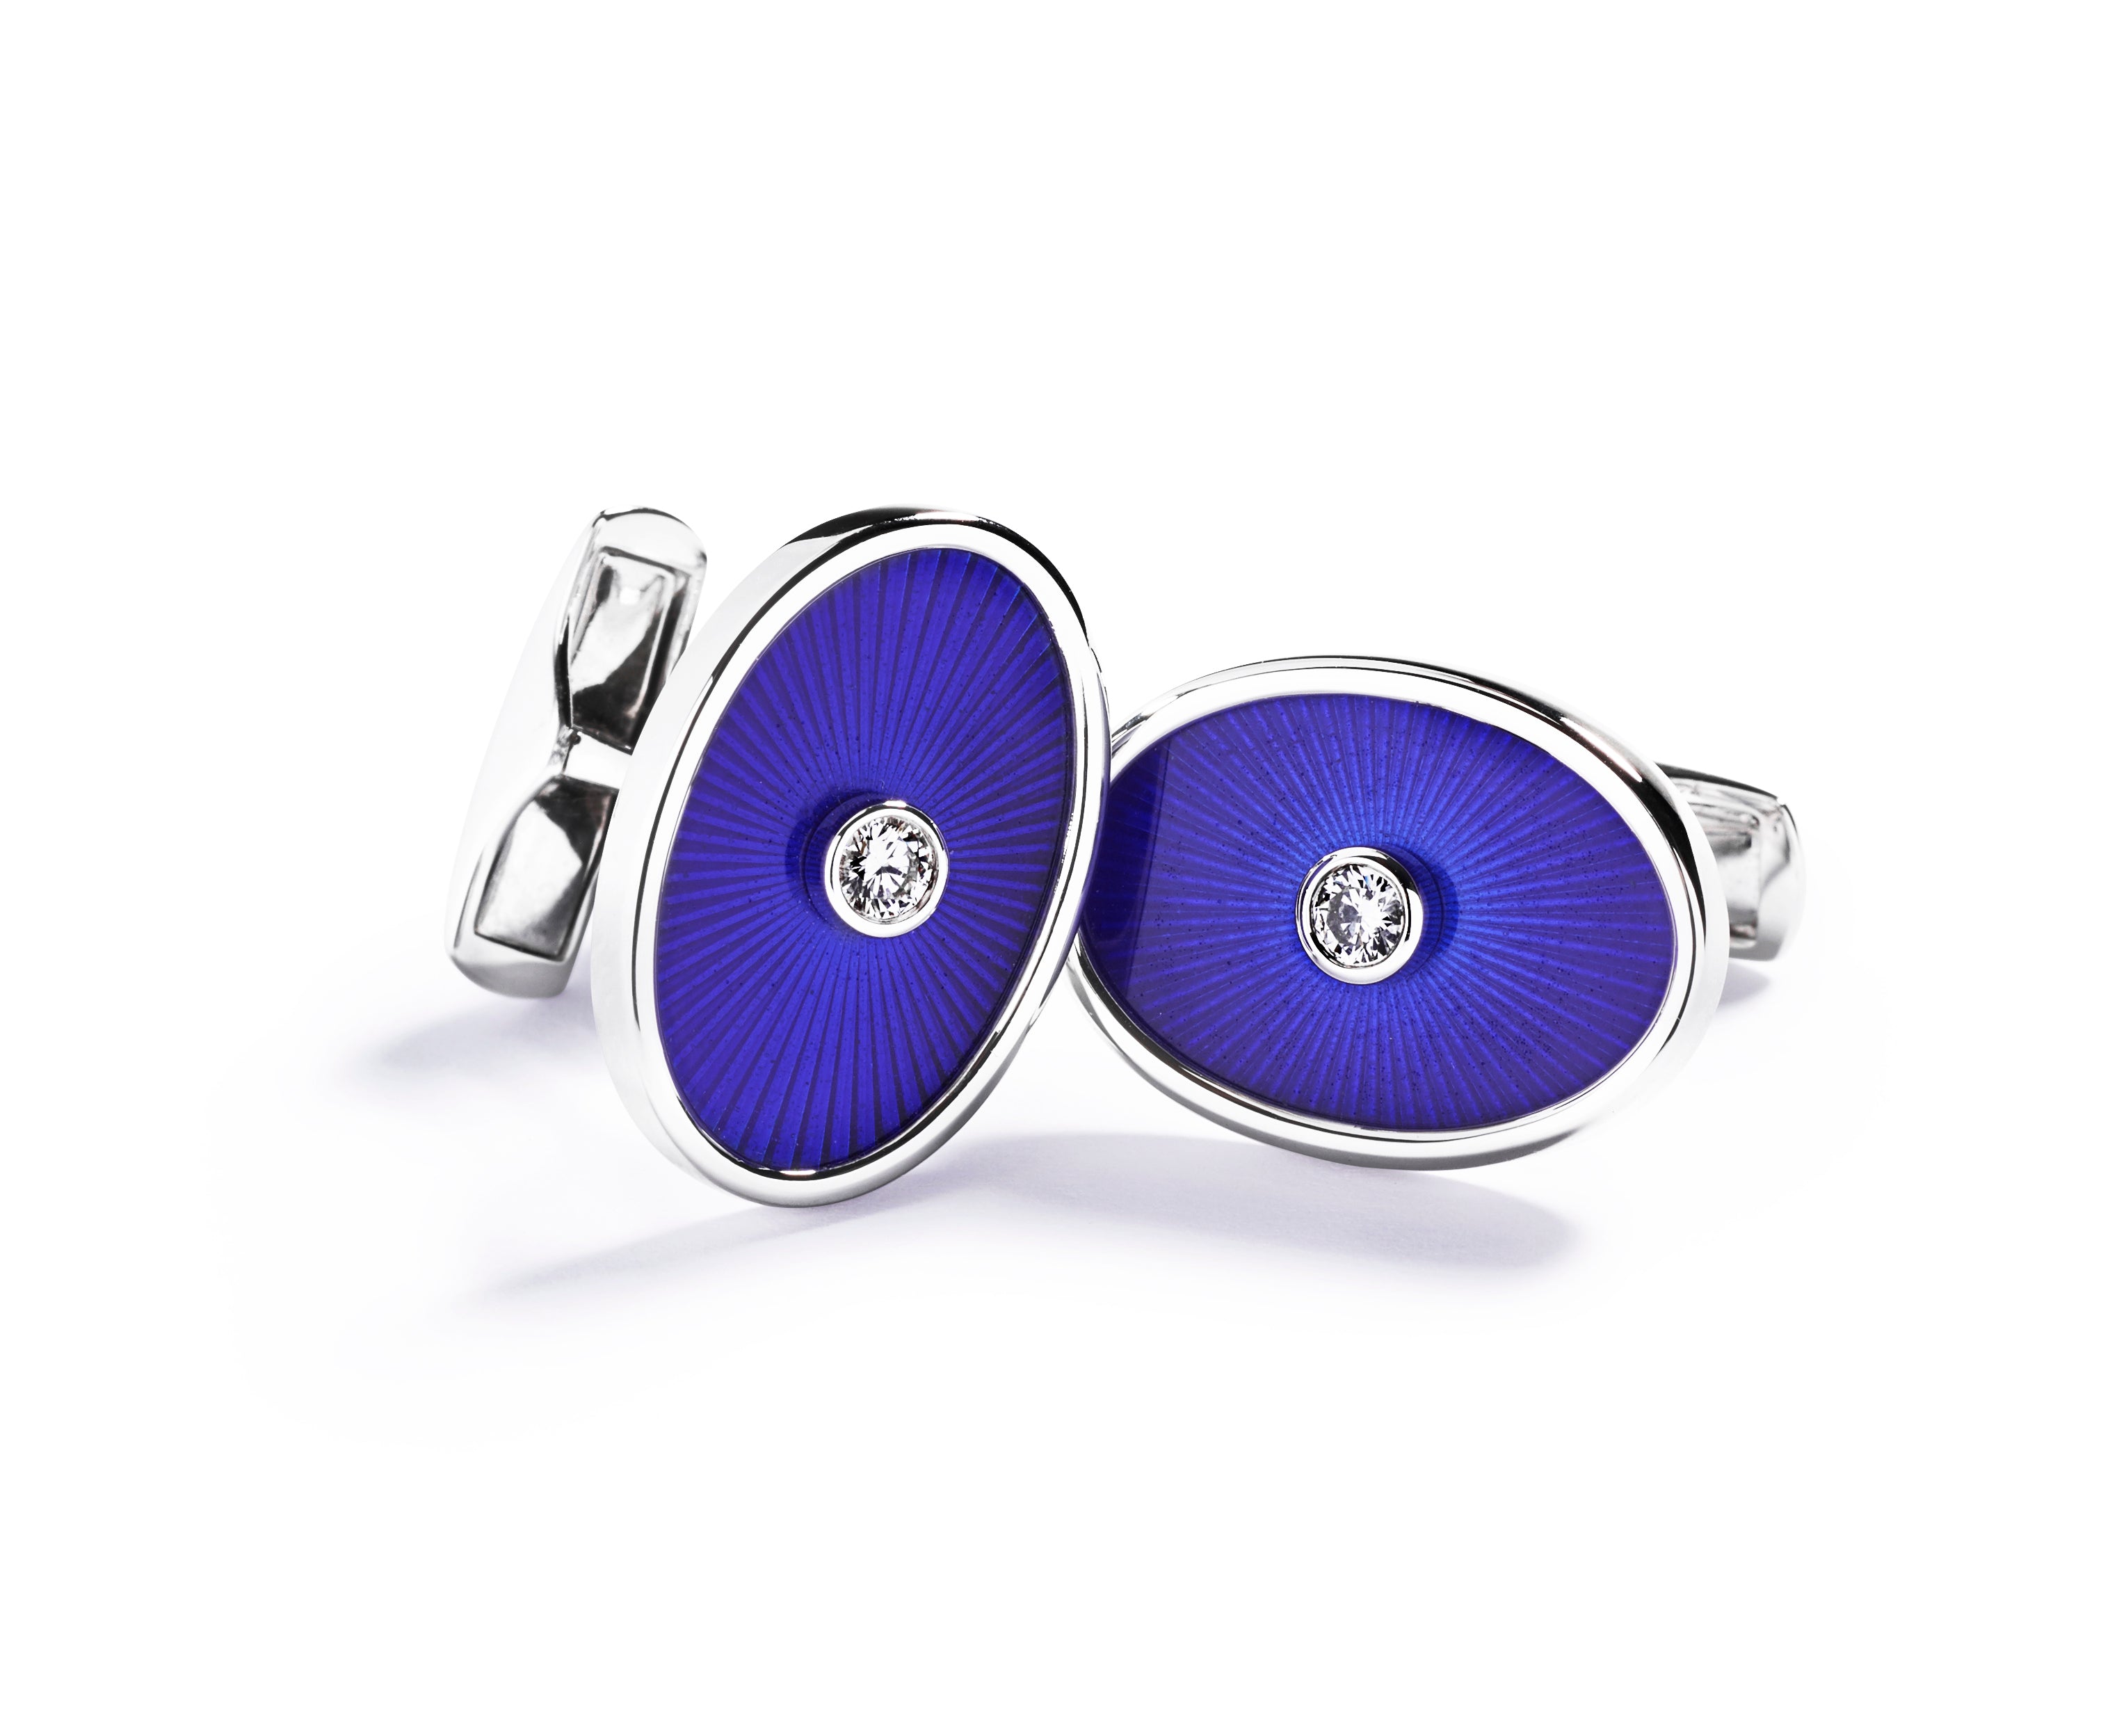 Cufflinks in 18k white gold and blue enamel adorned with two brilliant cut diamonds